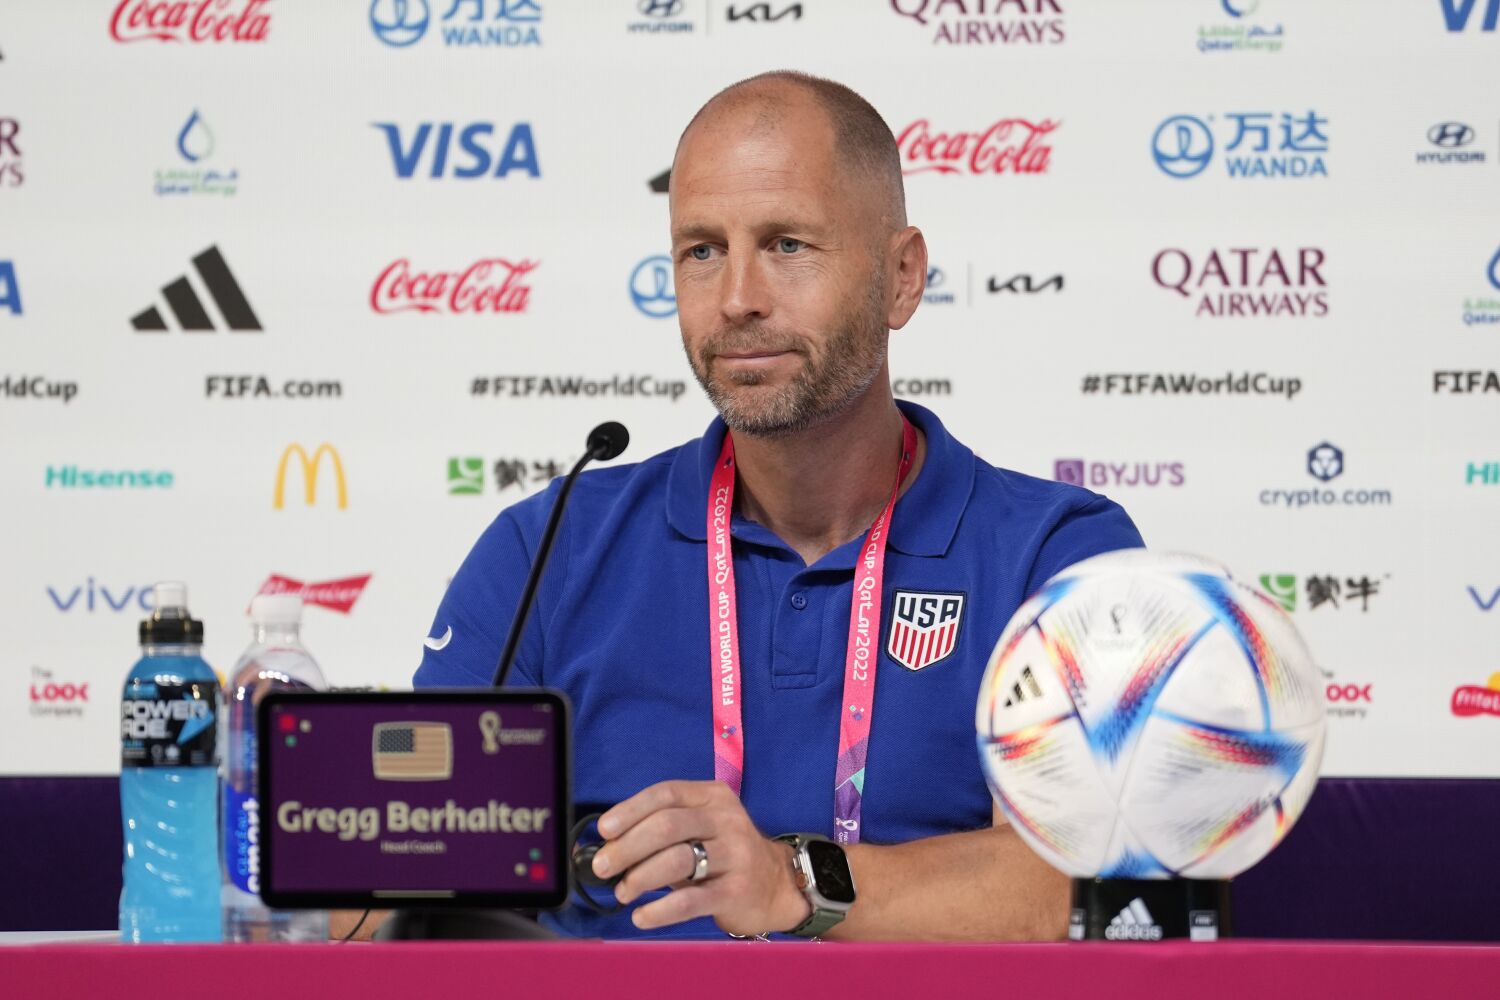 U.S. Soccer is investigating Gregg Berhalter, who says he was a blackmail target